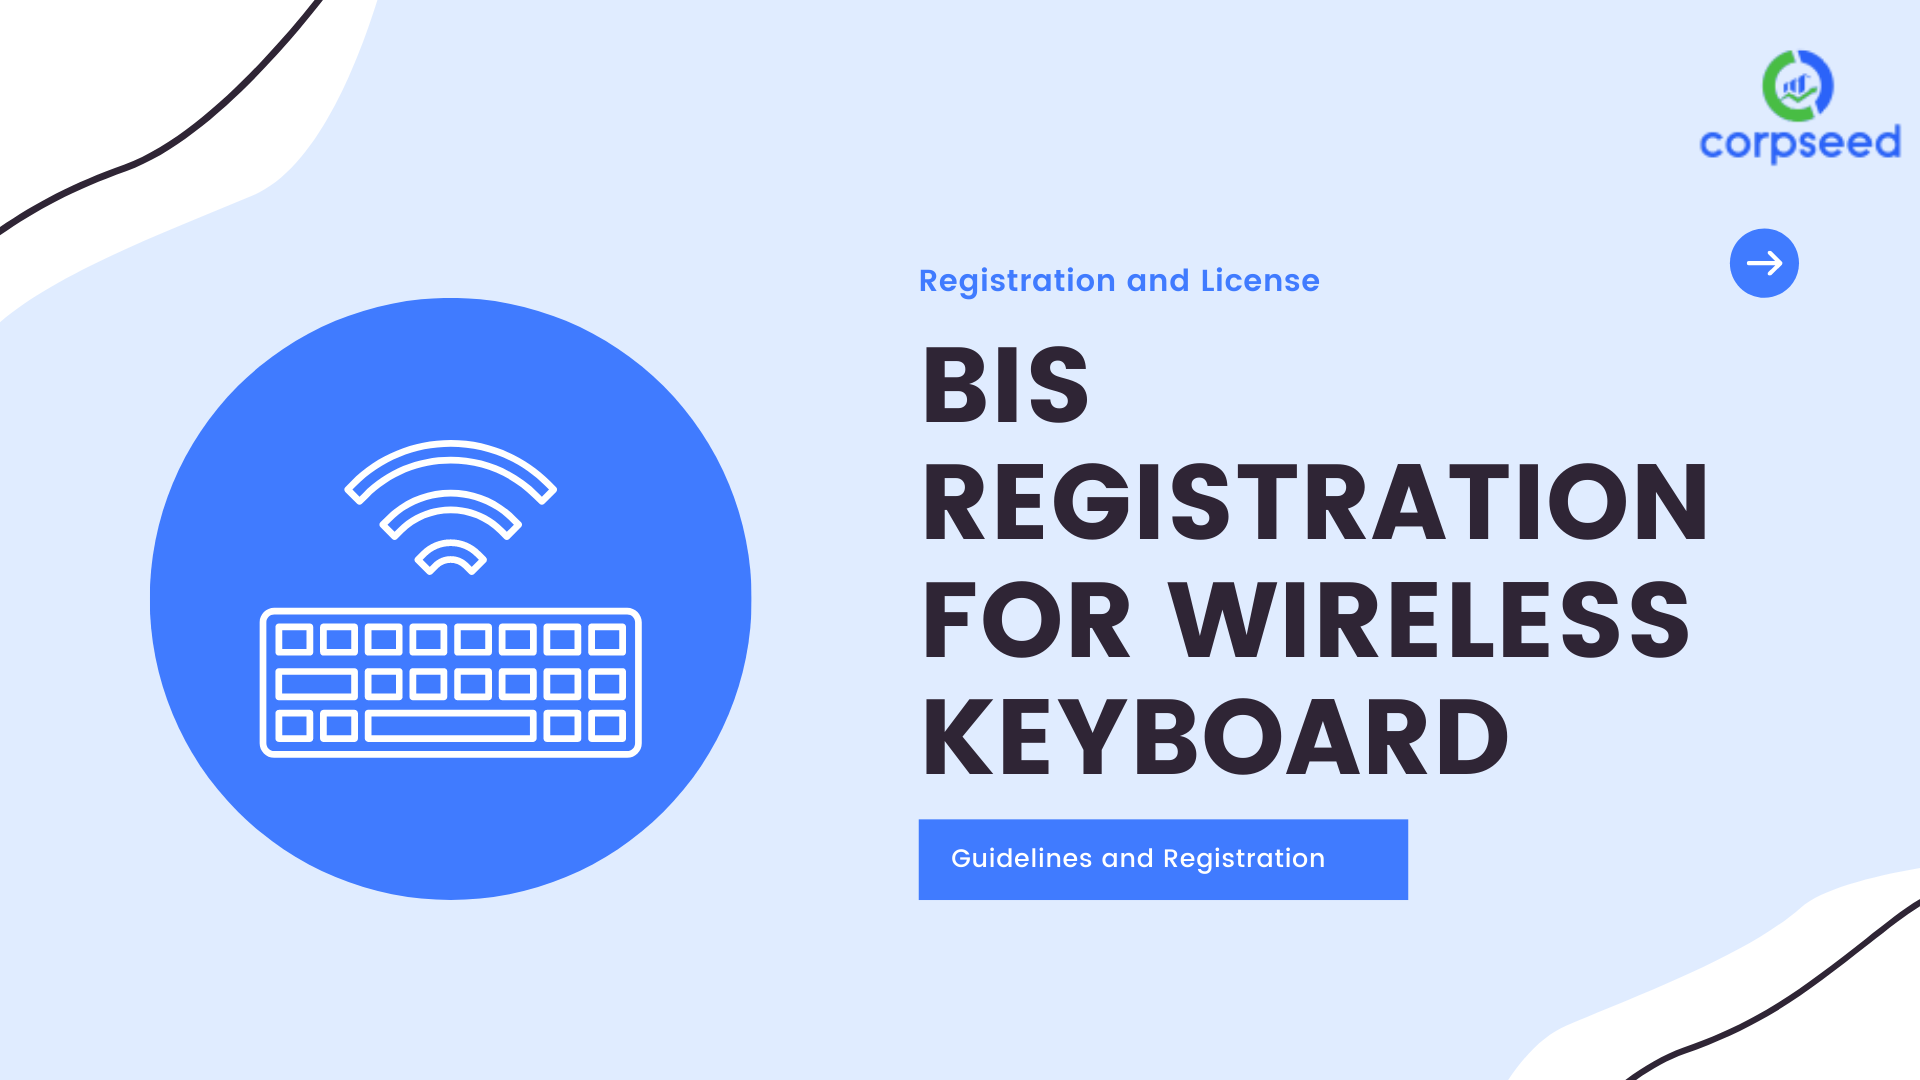 bis-registration-for-wireless-keyboard_corpseed.png